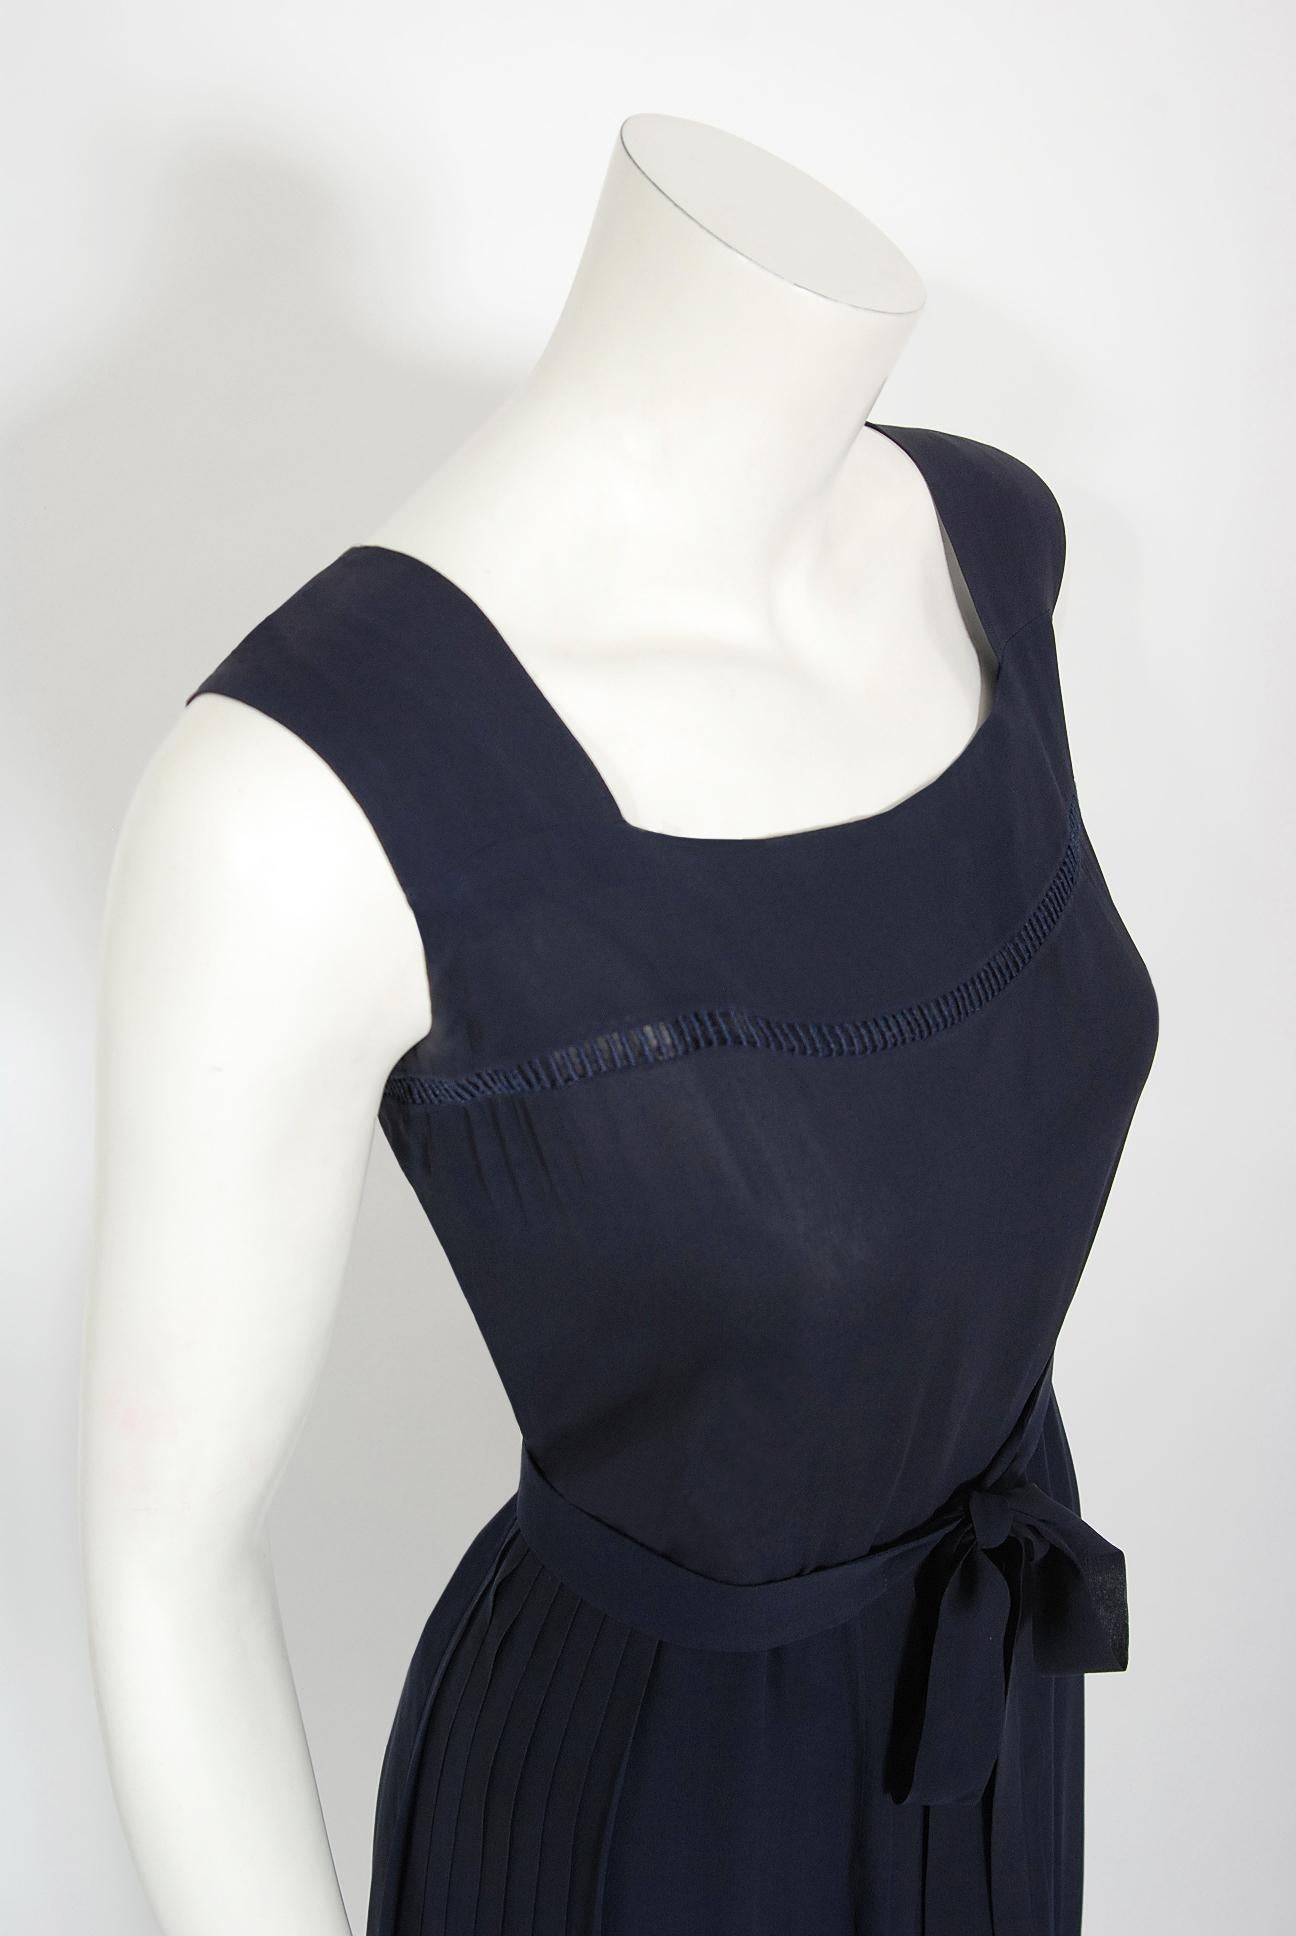 Women's Vintage 1974 Christian Dior Haute Couture Documented Navy Pleated Silk Dress Set